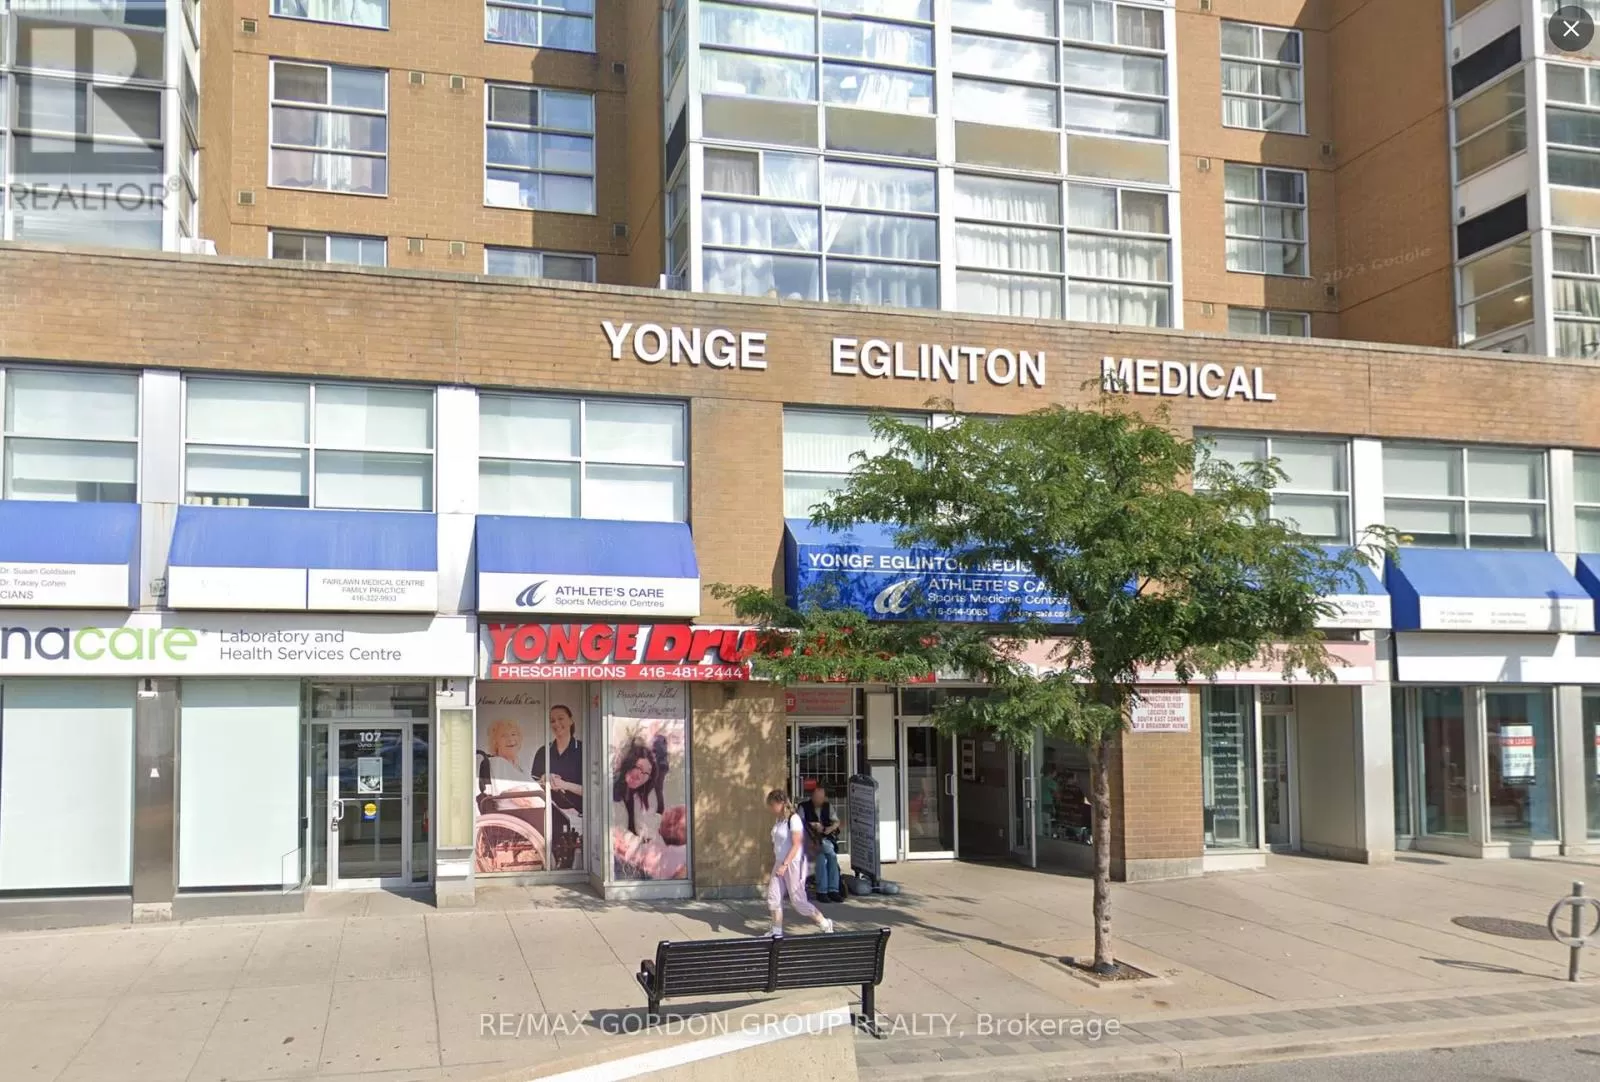 Offices for rent: Ll09/1 - 2401 Yonge Street, Toronto, Ontario M4P 3H1